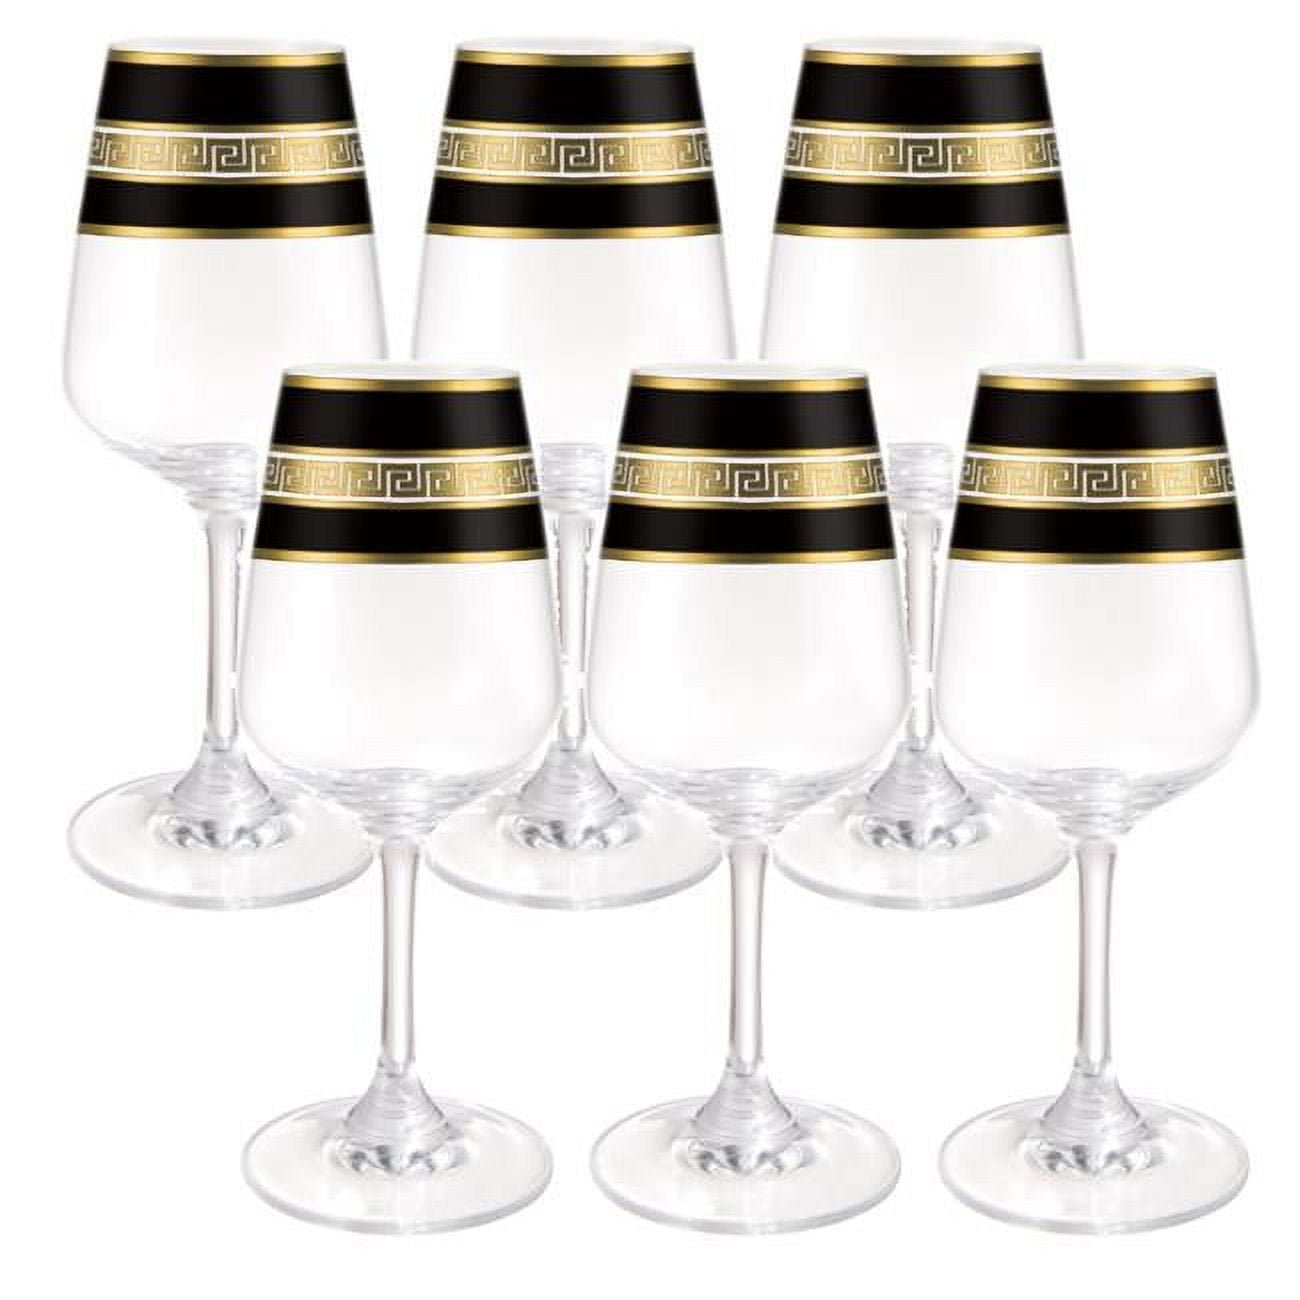 Picture of Brilliant Gifts B3193.002.BL 9 oz Black Goblets - Set of 6